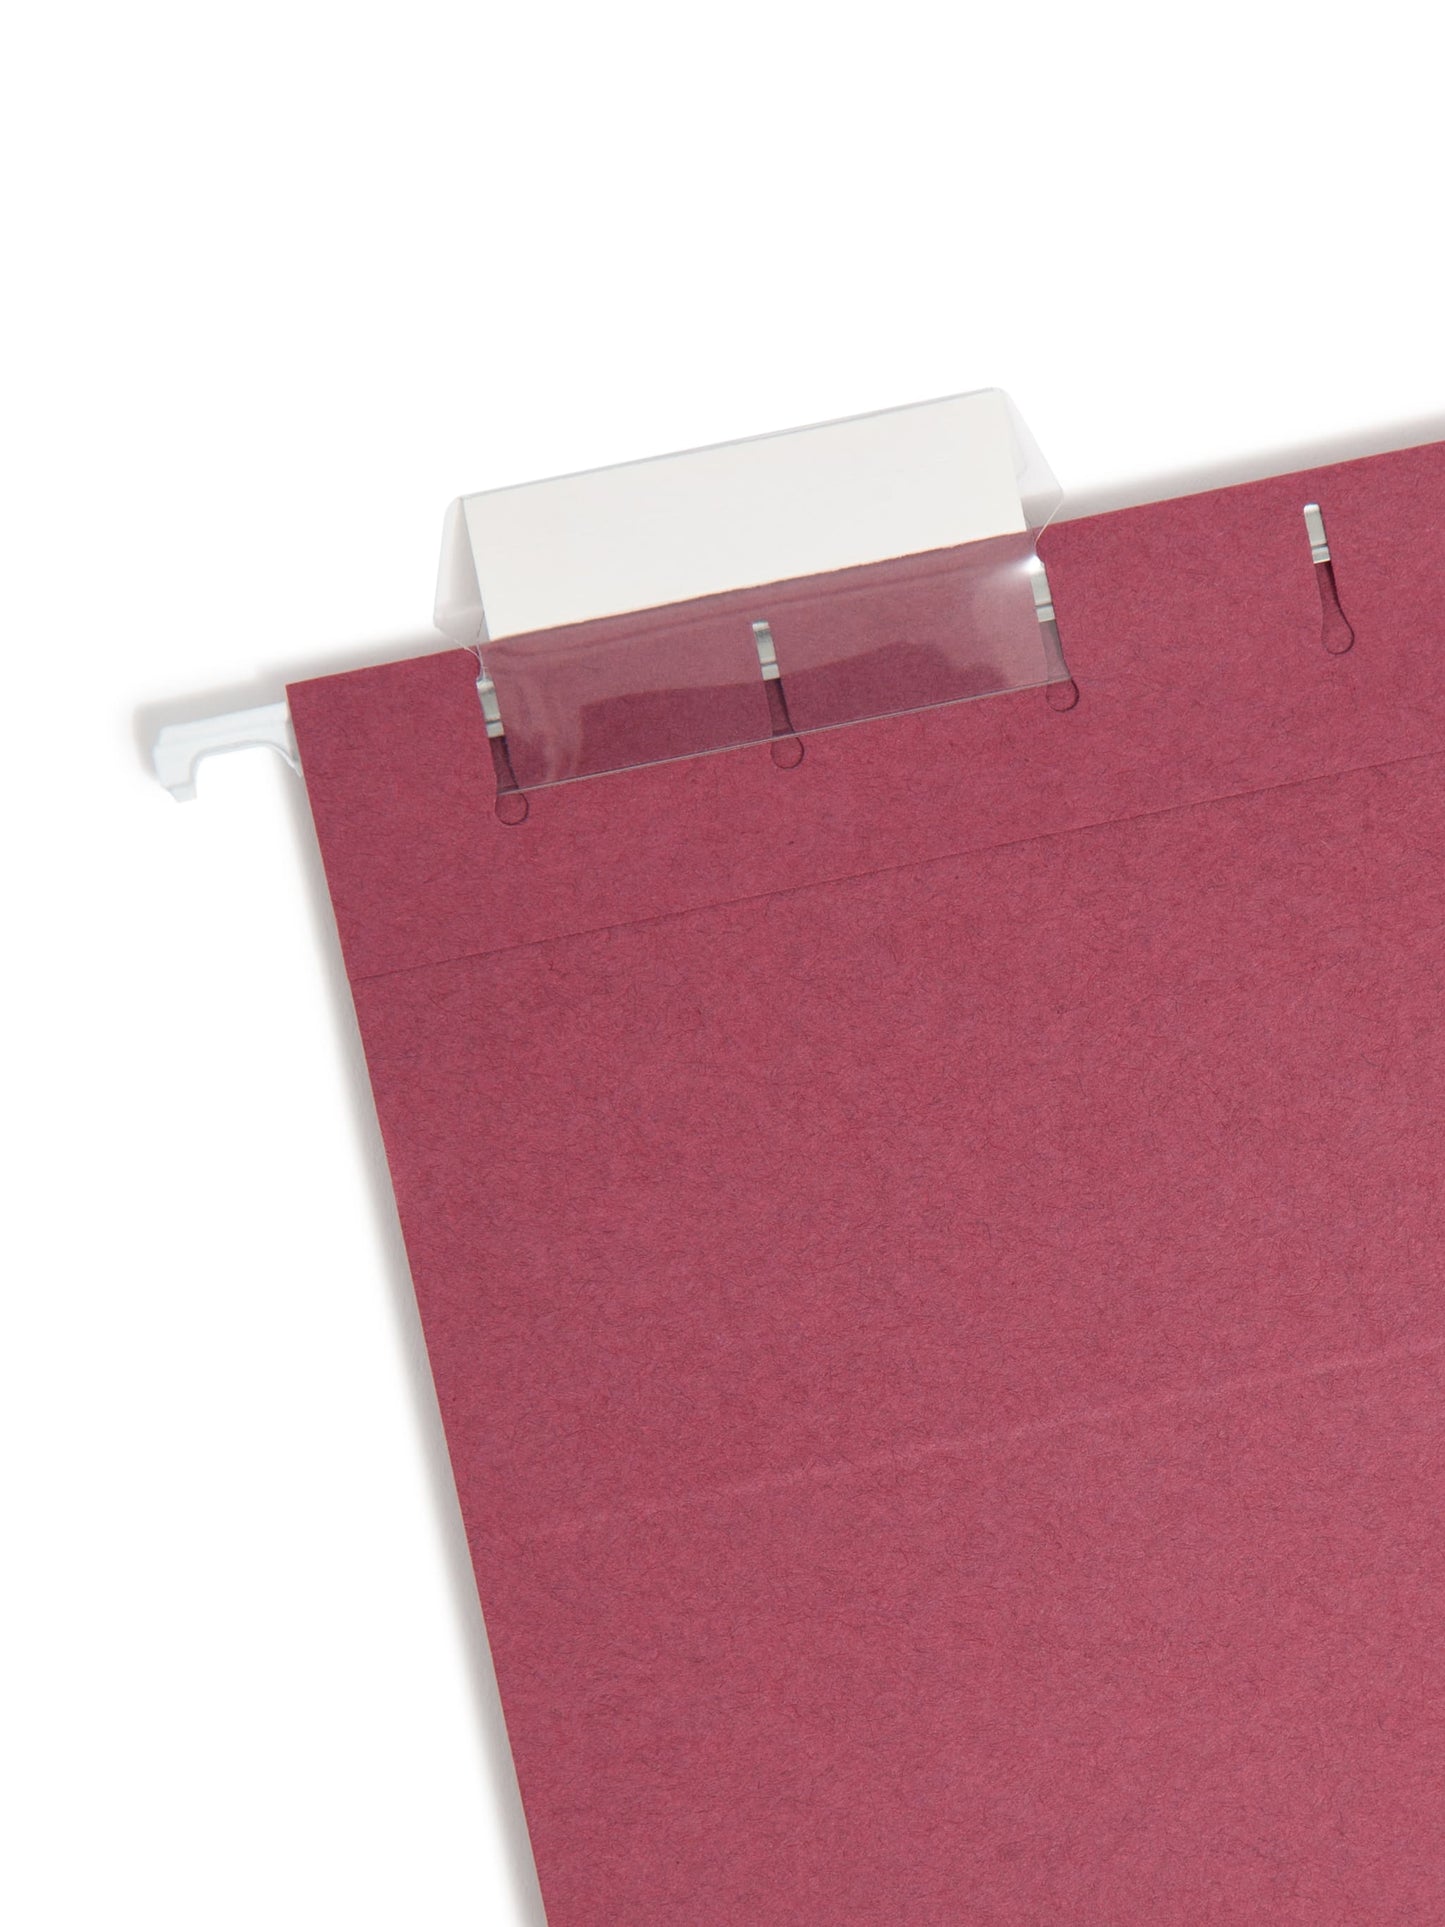 Standard Hanging File Folders with 1/5-Cut Tabs, Assorted Colors Color, Letter Size, Set of 25, 086486640565